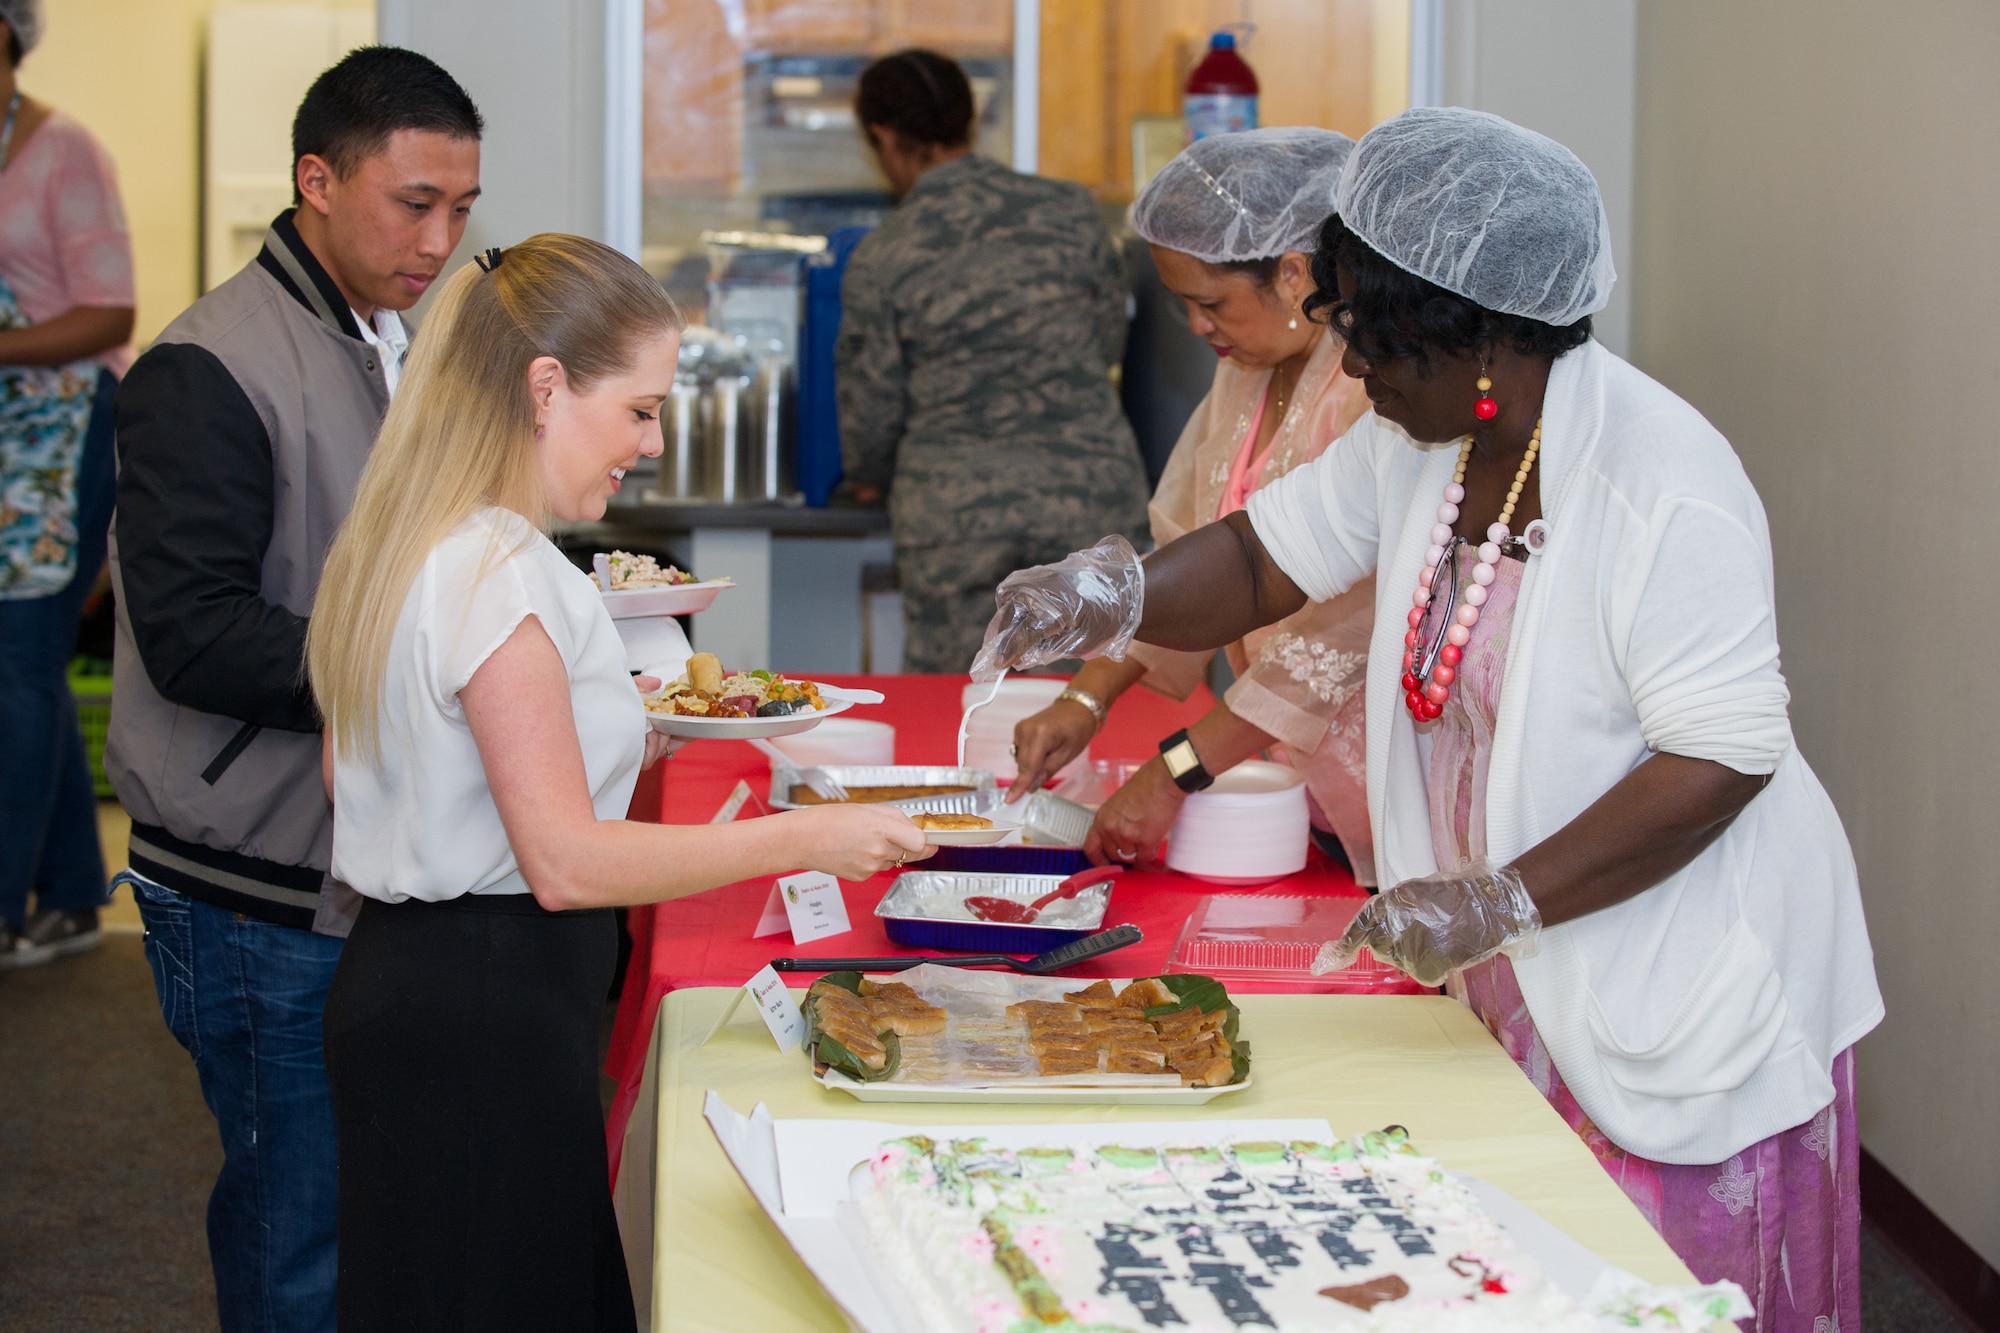 The 45th Space Wing hosted an Asian American and Pacific Islander event at the Patrick Air Force Base, Fla., Shark Center, to kick off the heritage observance month with the Taste of Asia event May 4, 2016. The theme for this year's observance is: Walk together, embrace differences, build legacies, which is designed to bring cultural awareness through art, education, food, entertainment and more. (U.S. Air Force photos/Benjamin Thacker) (Released)